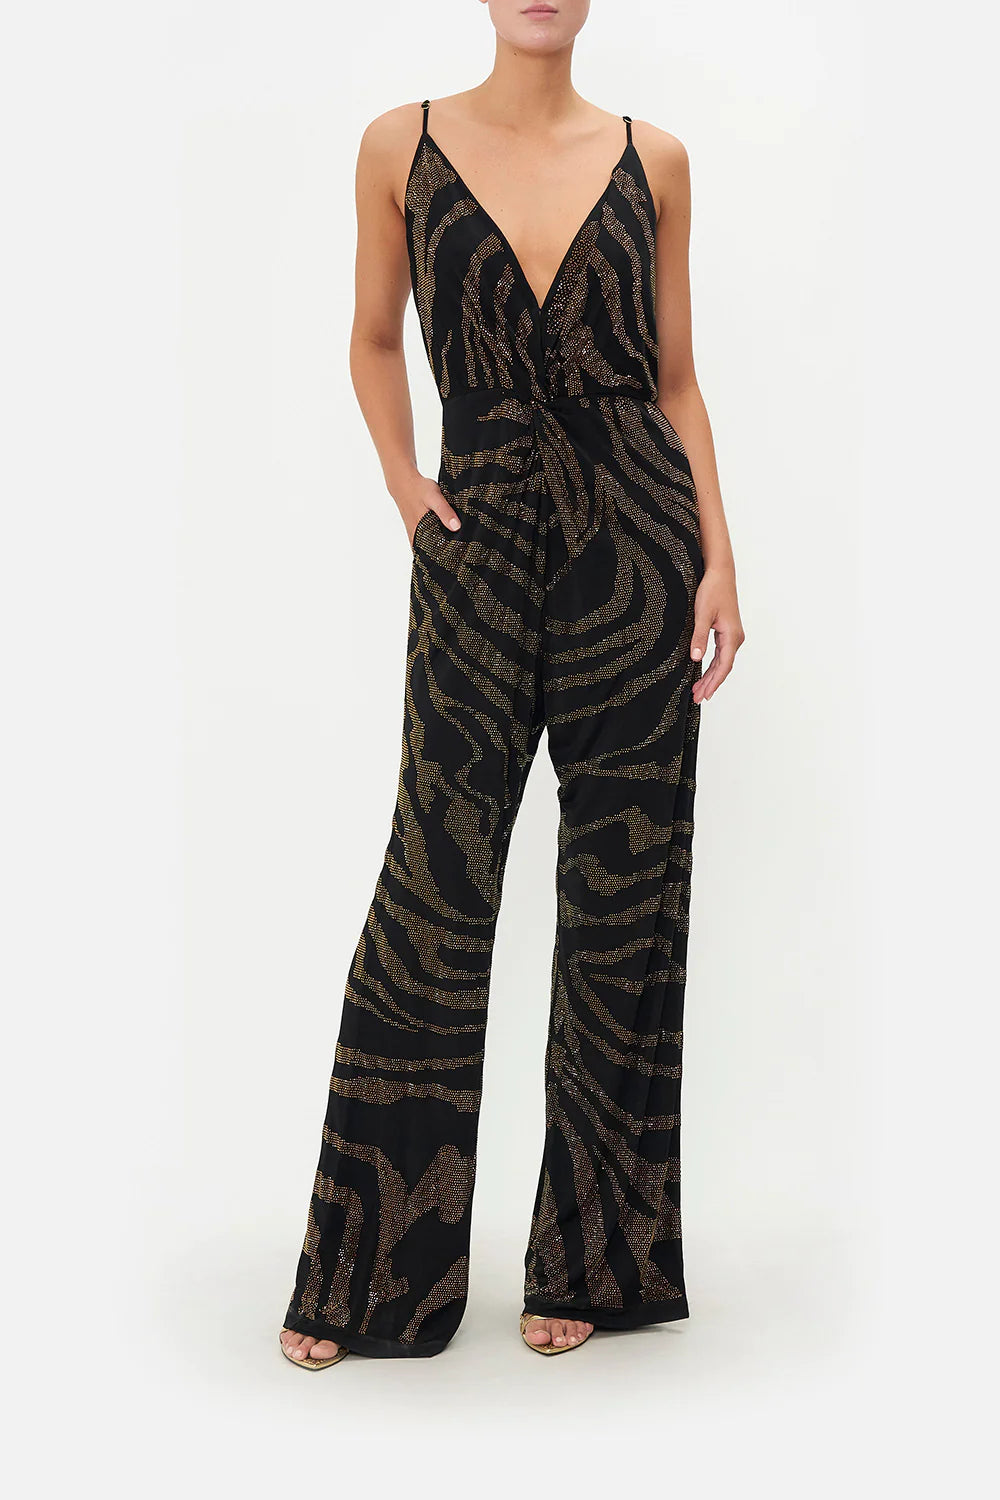 Camilla - Twist Front Jersey Jumpsuit in Tame My Tiger